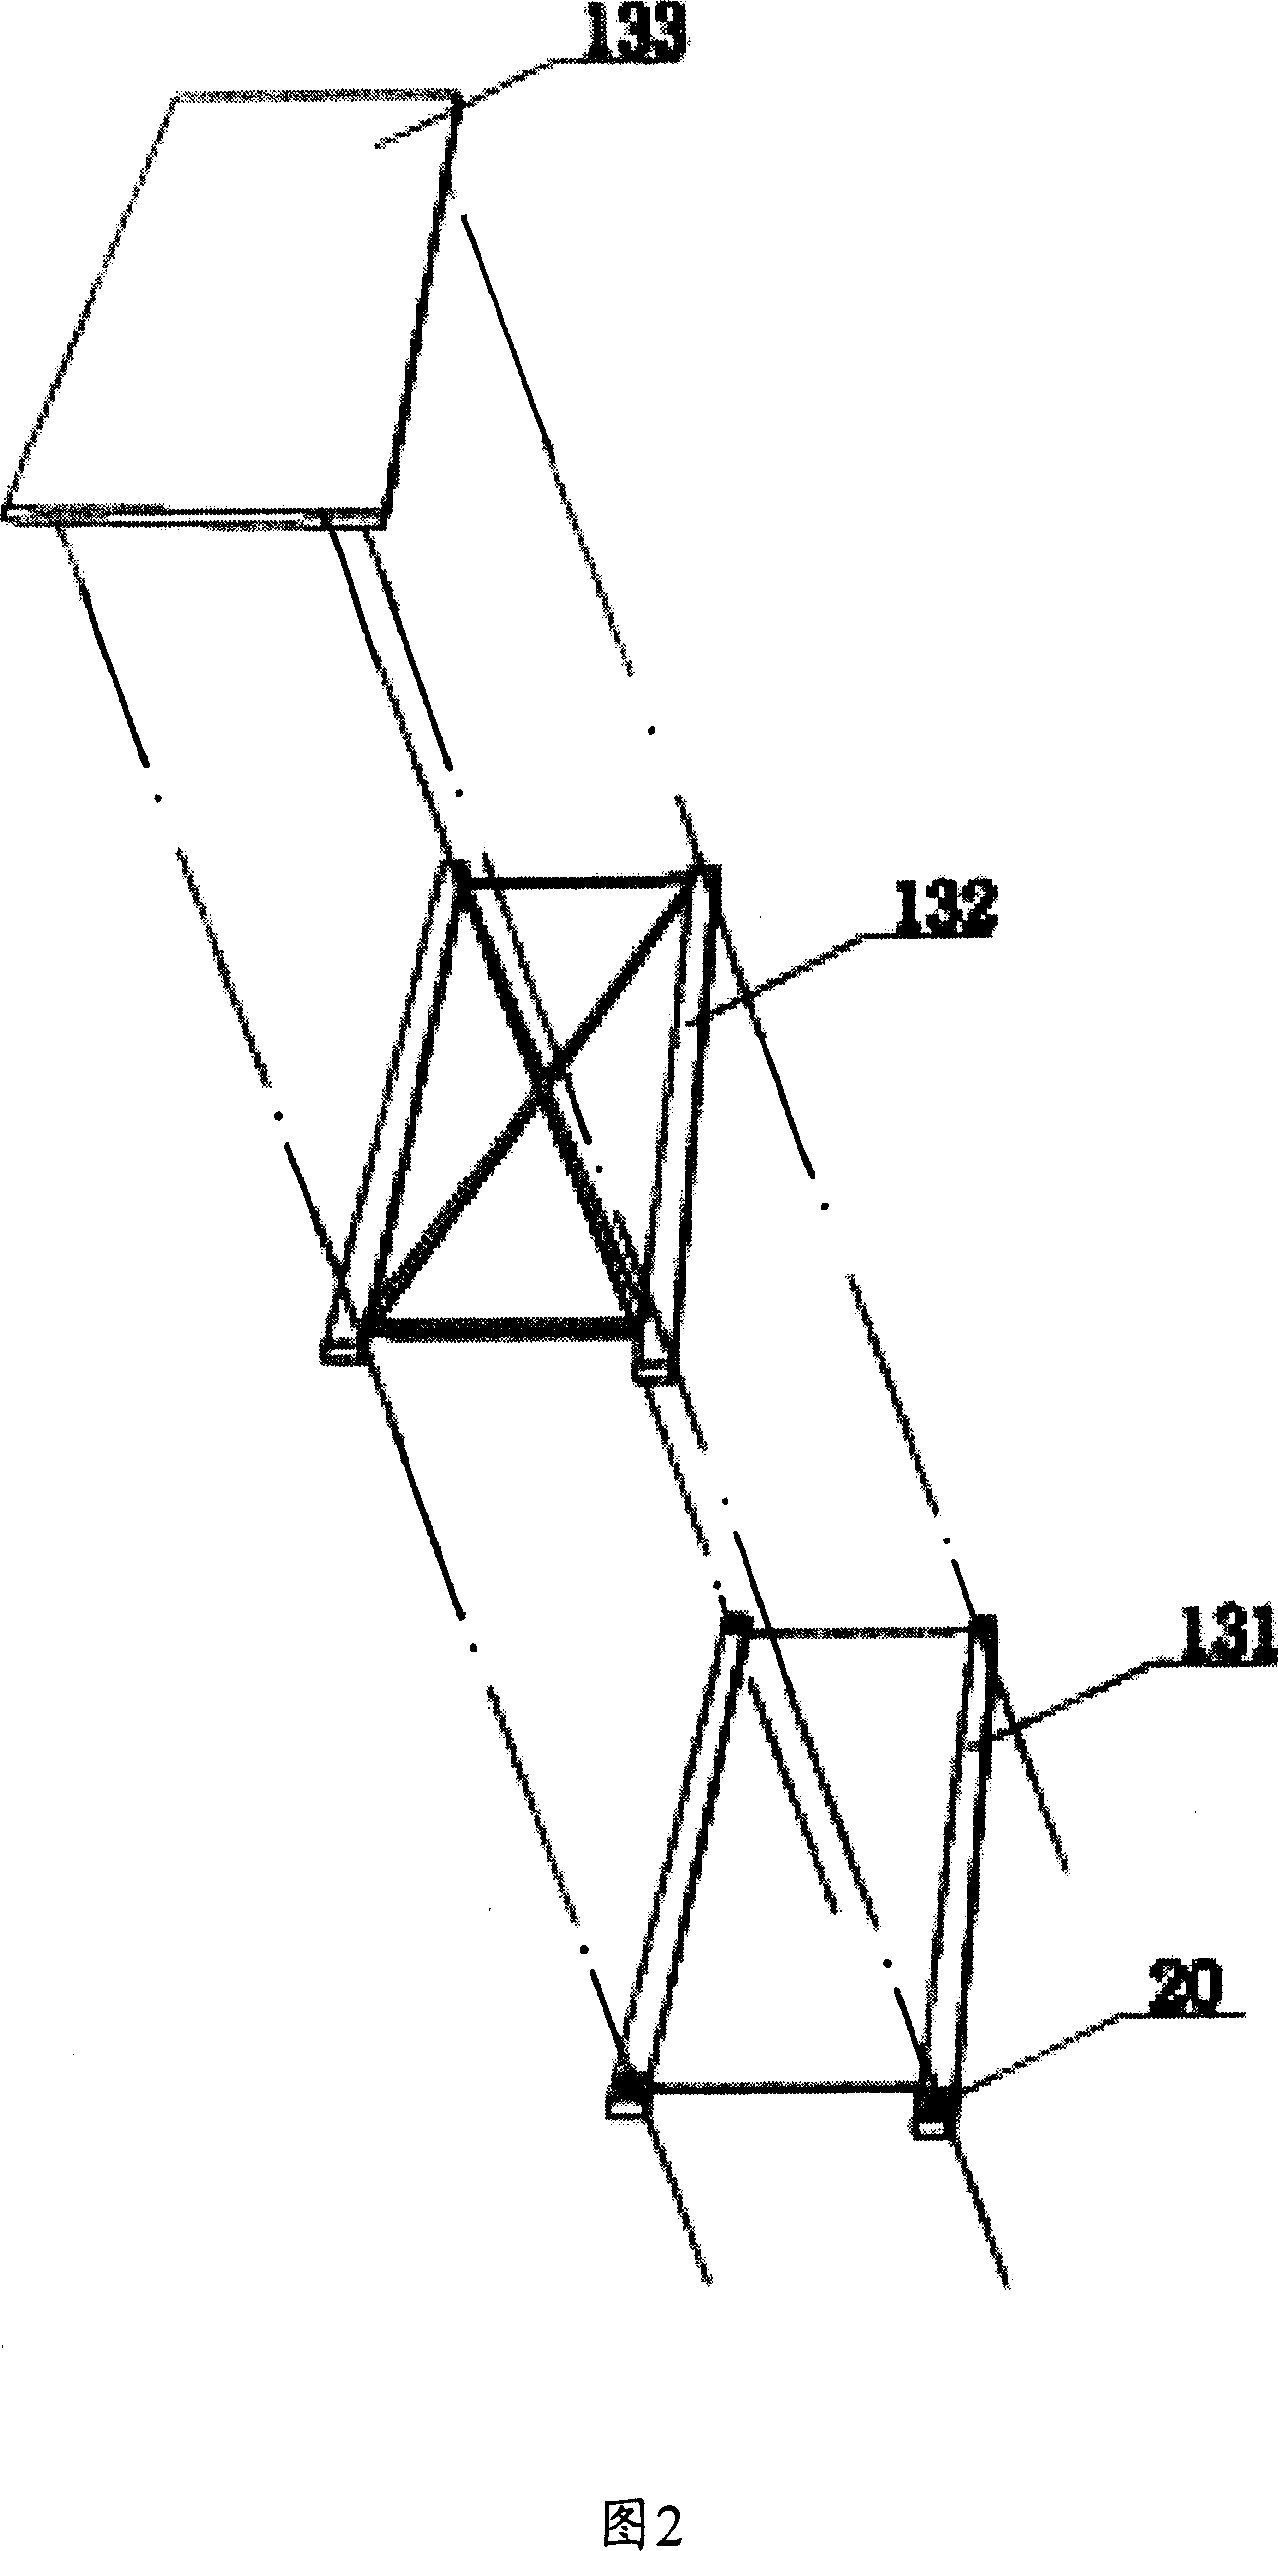 Realizing method of intelligent motion or therapeutic apparatus